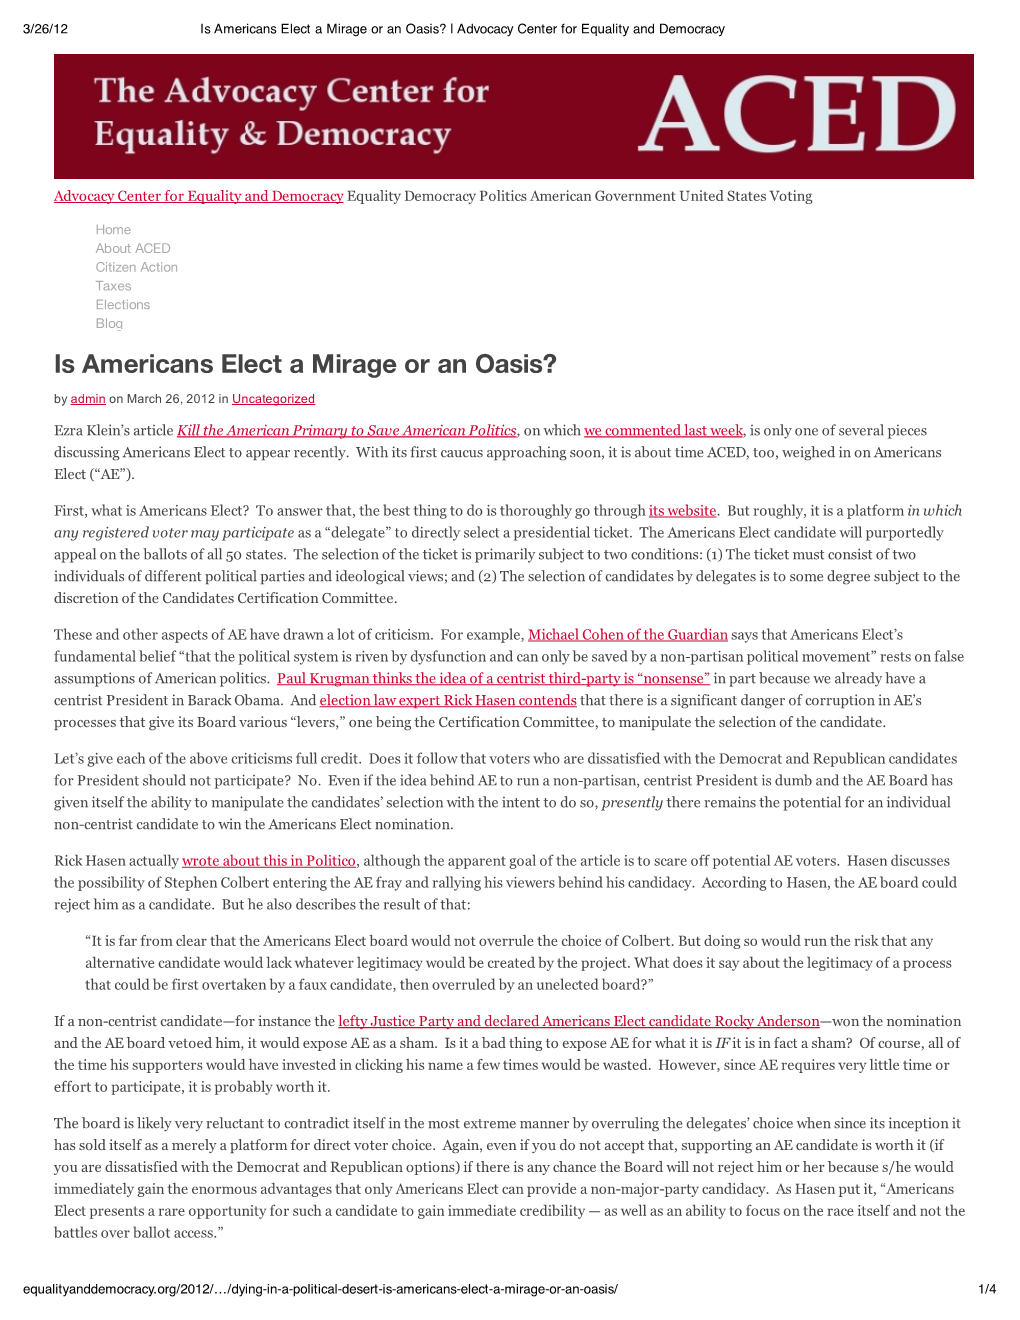 Is Americans Elect a Mirage Or an Oasis? | Advocacy Center for Equality and Democracy